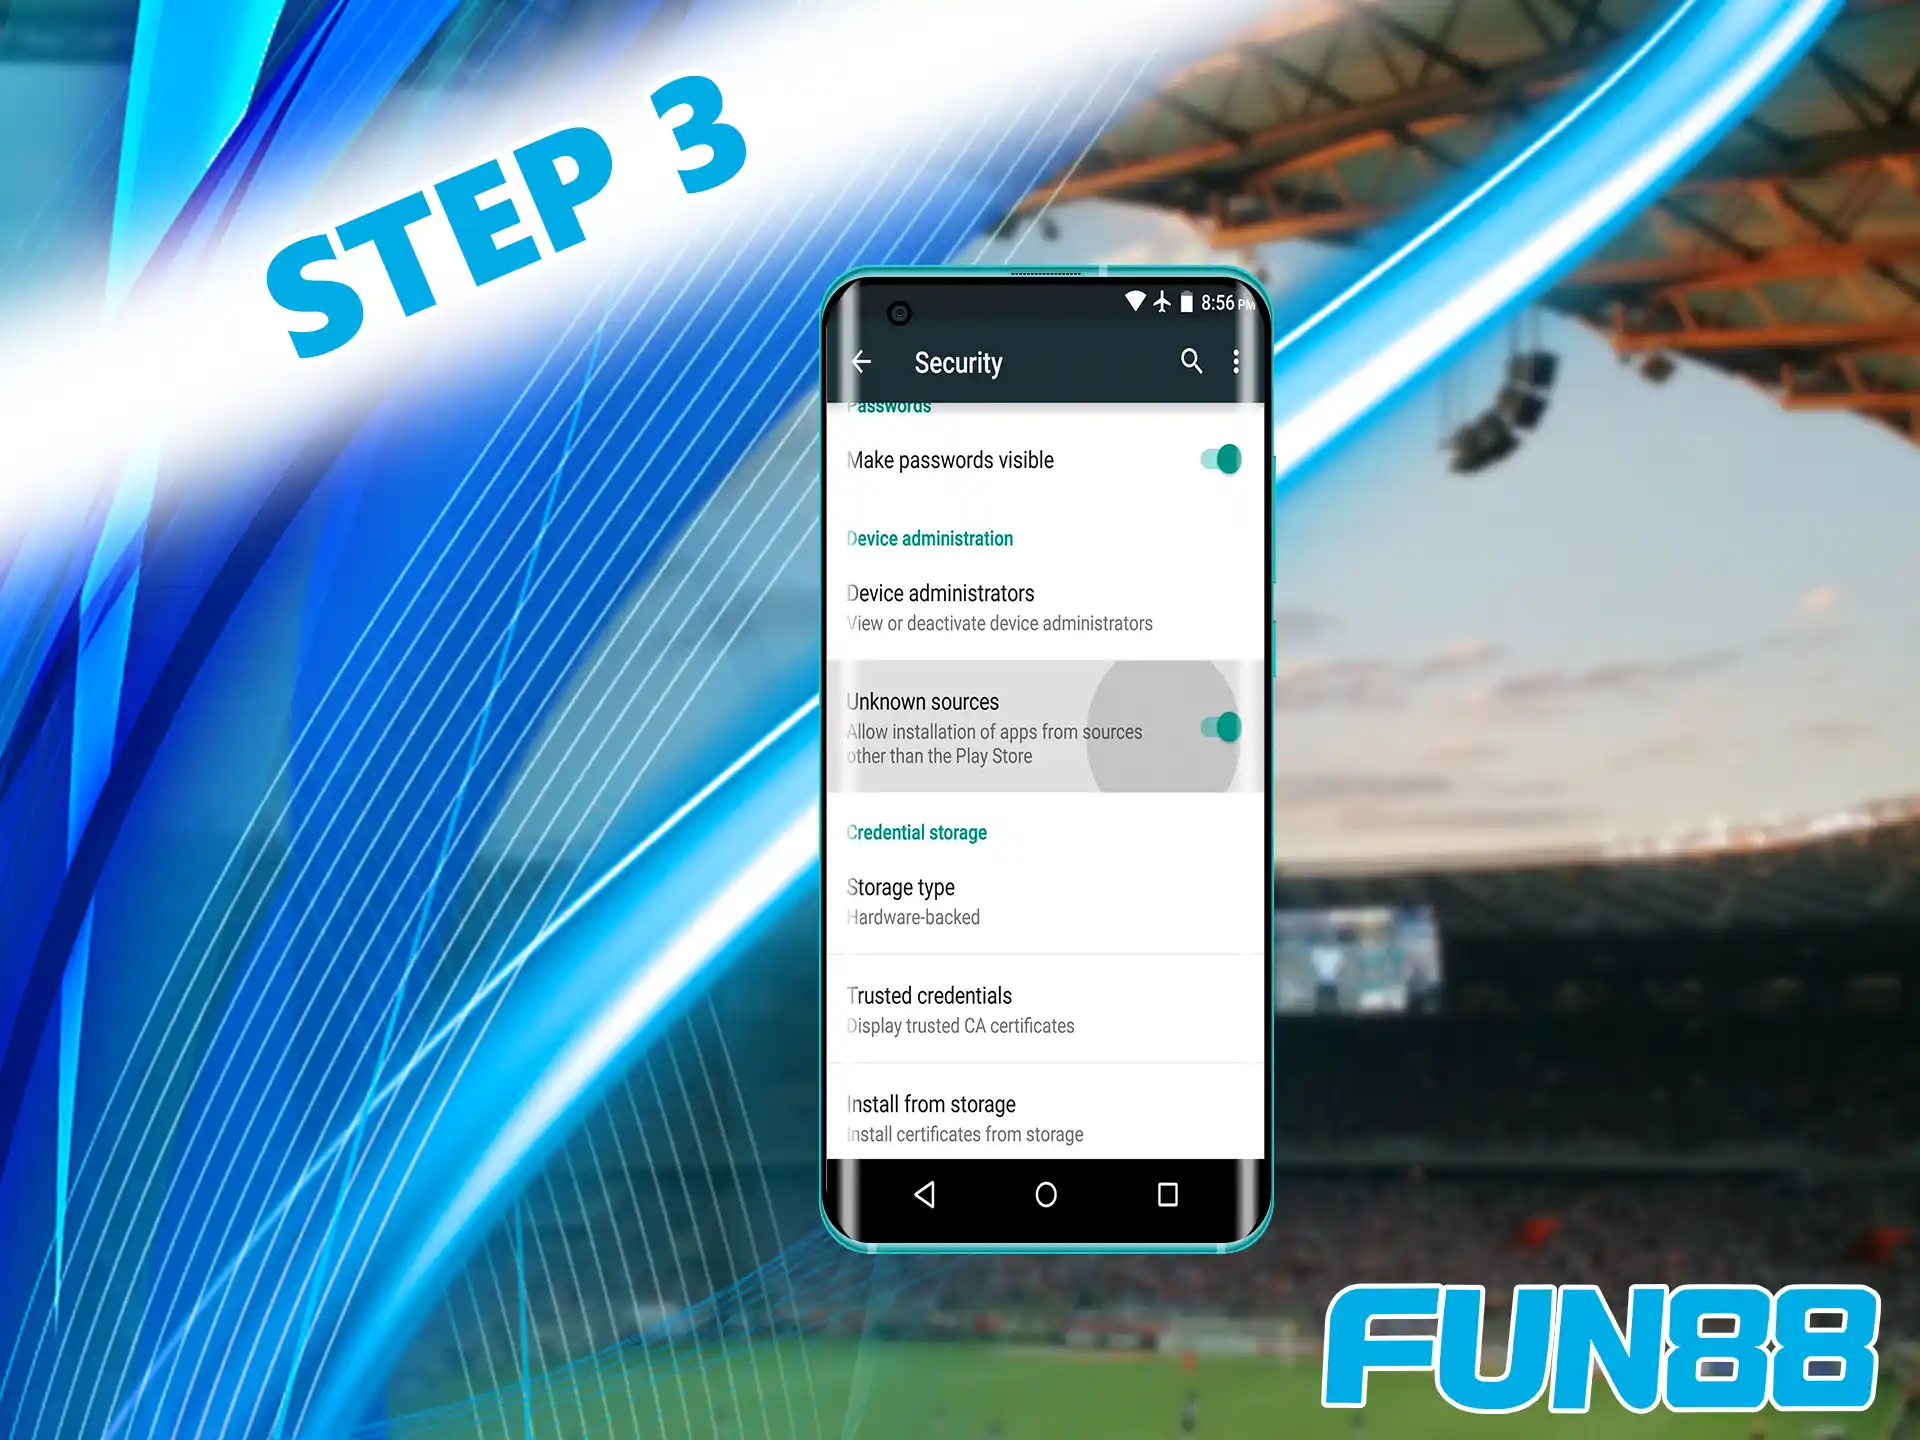 Next, in the settings of your smartphone, activate a special option that will avoid problems when installing the Fun88 File application.